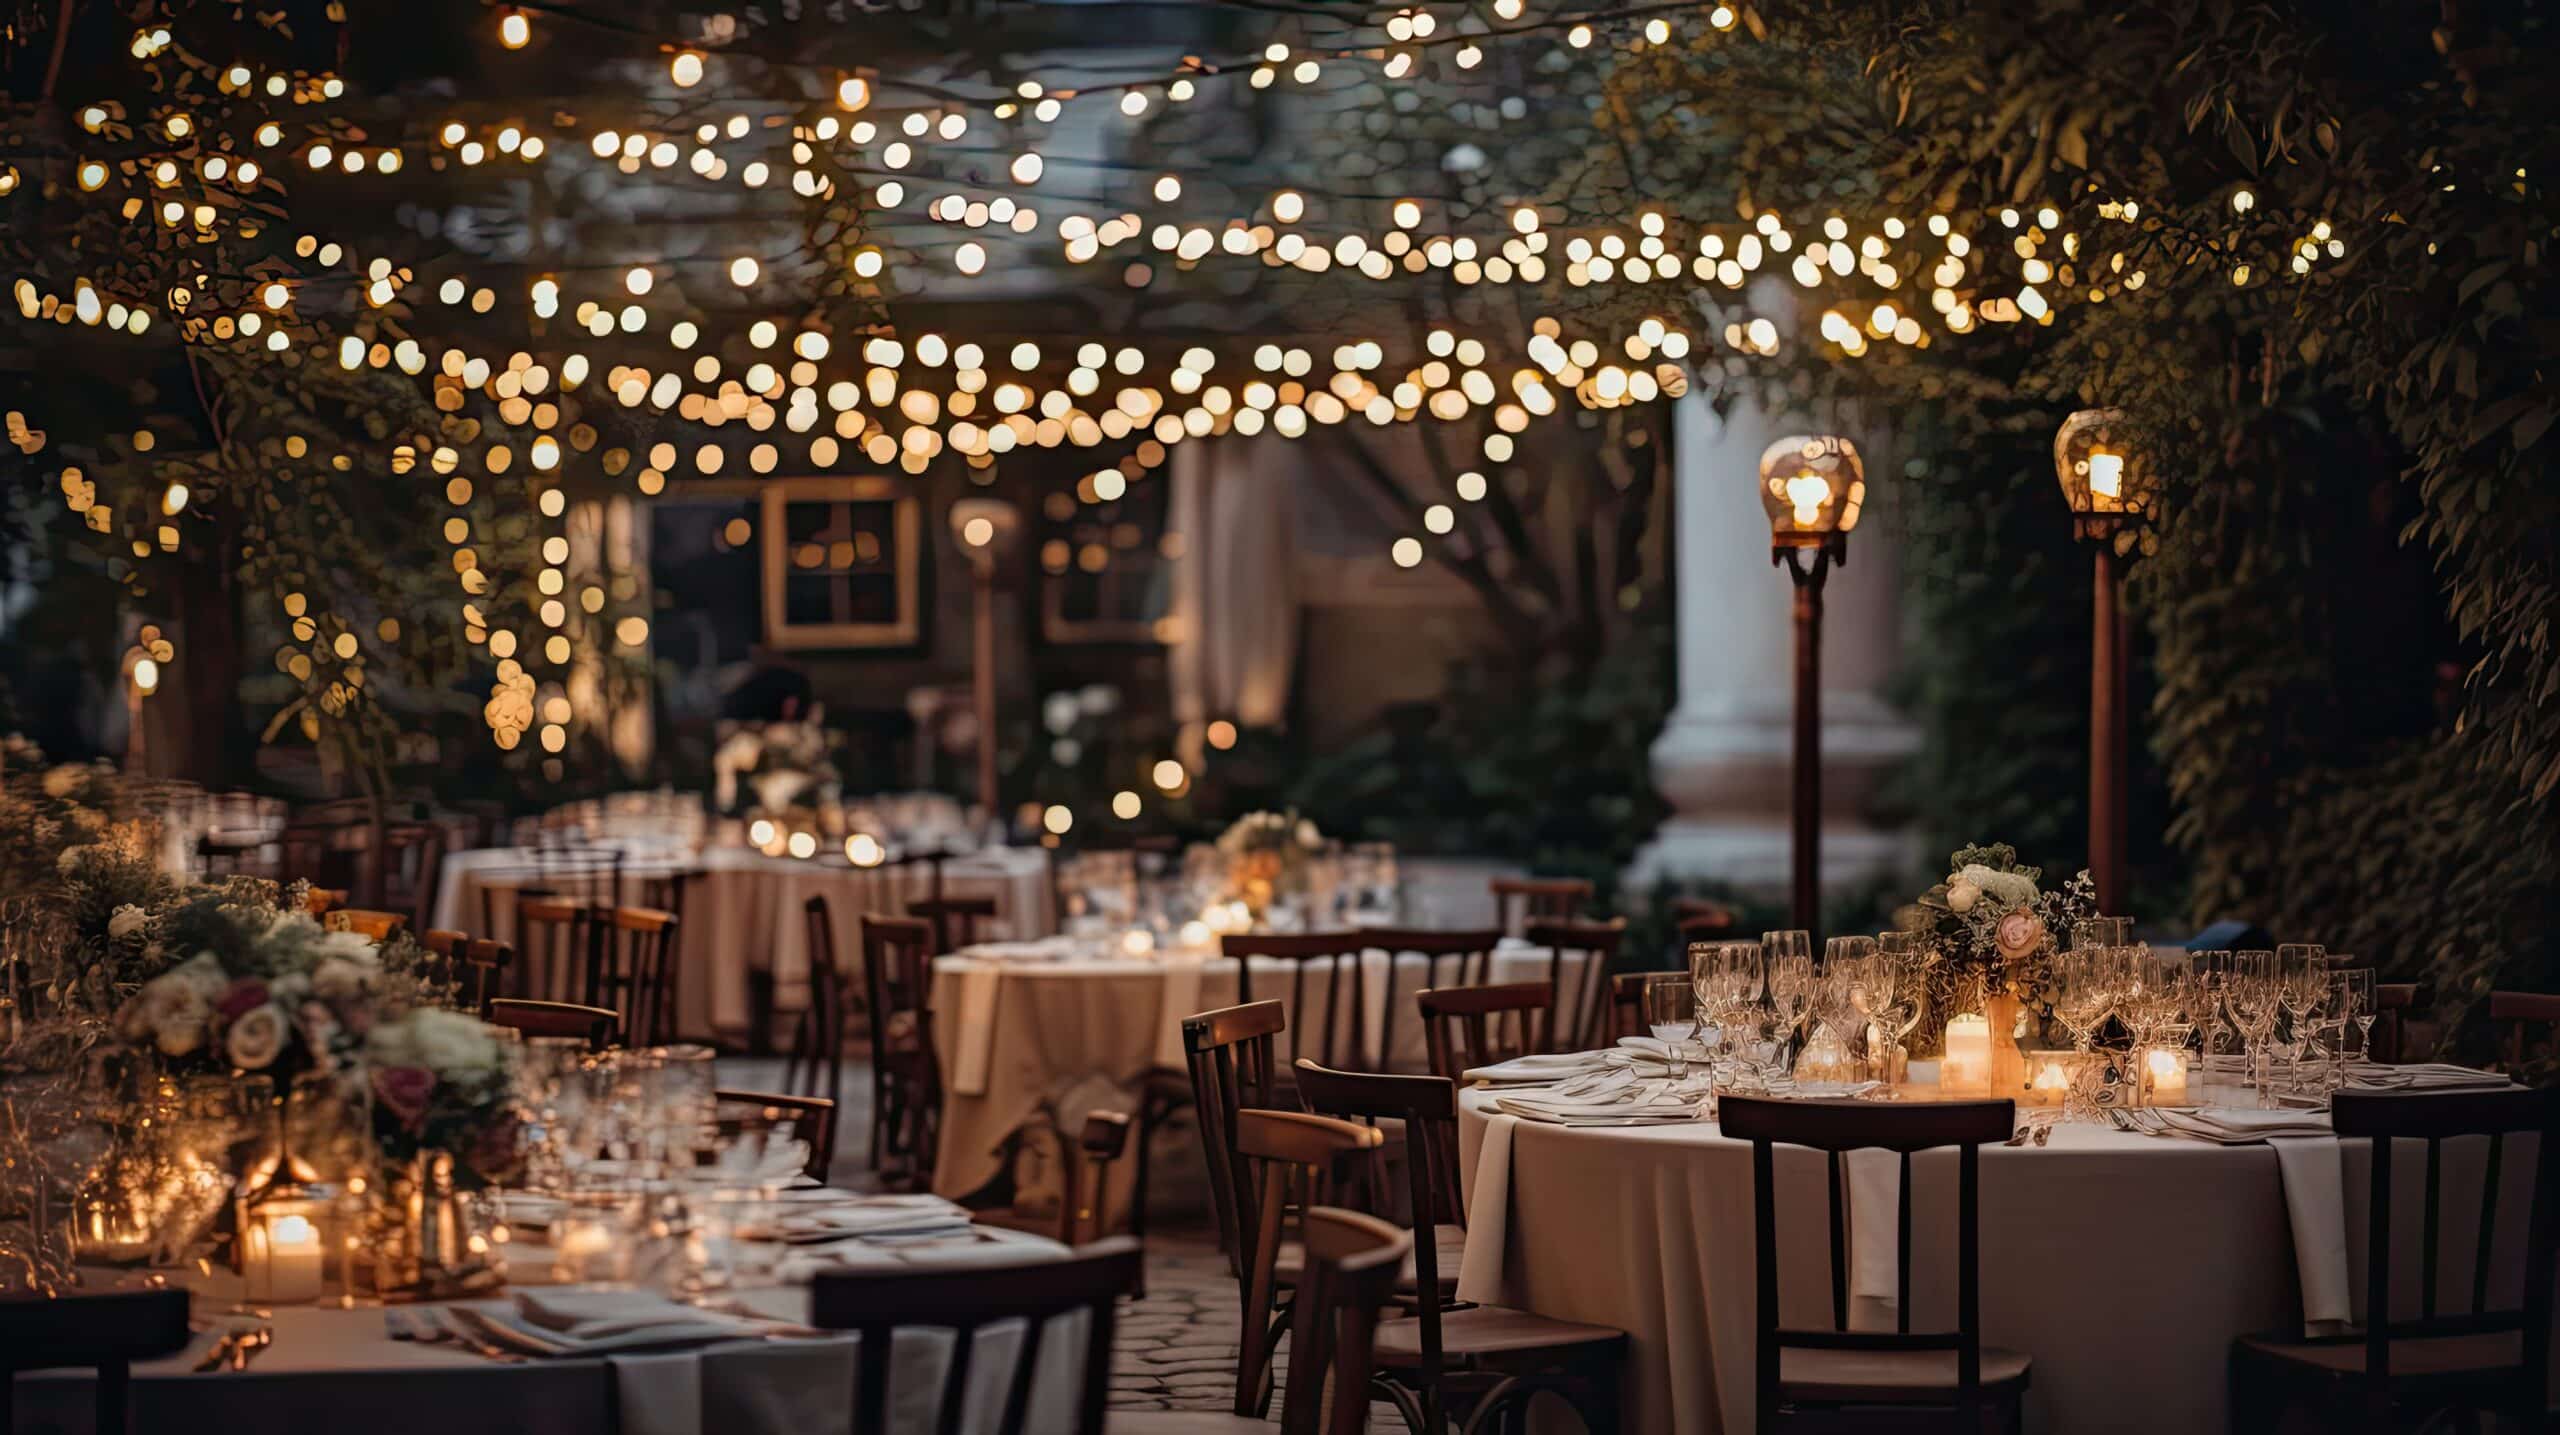 Hosting an Event? You Need This Table Rental Guide.